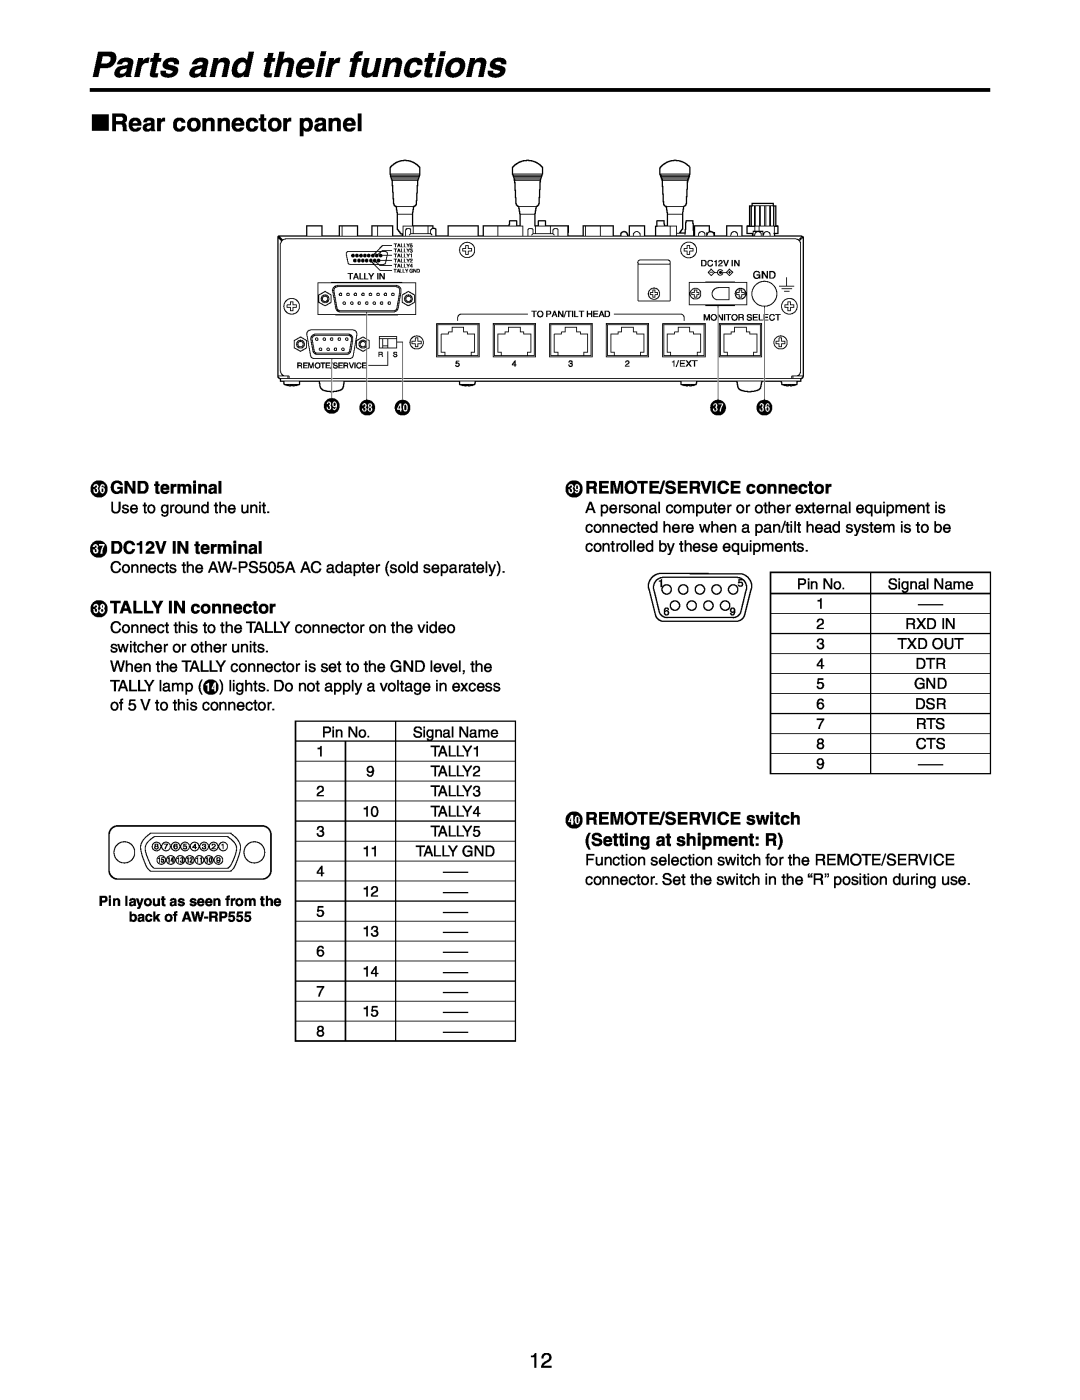 Panasonic AW-RP555N manual Parts and their functions, GND terminal, DC12V IN terminal, TALLY IN connector 